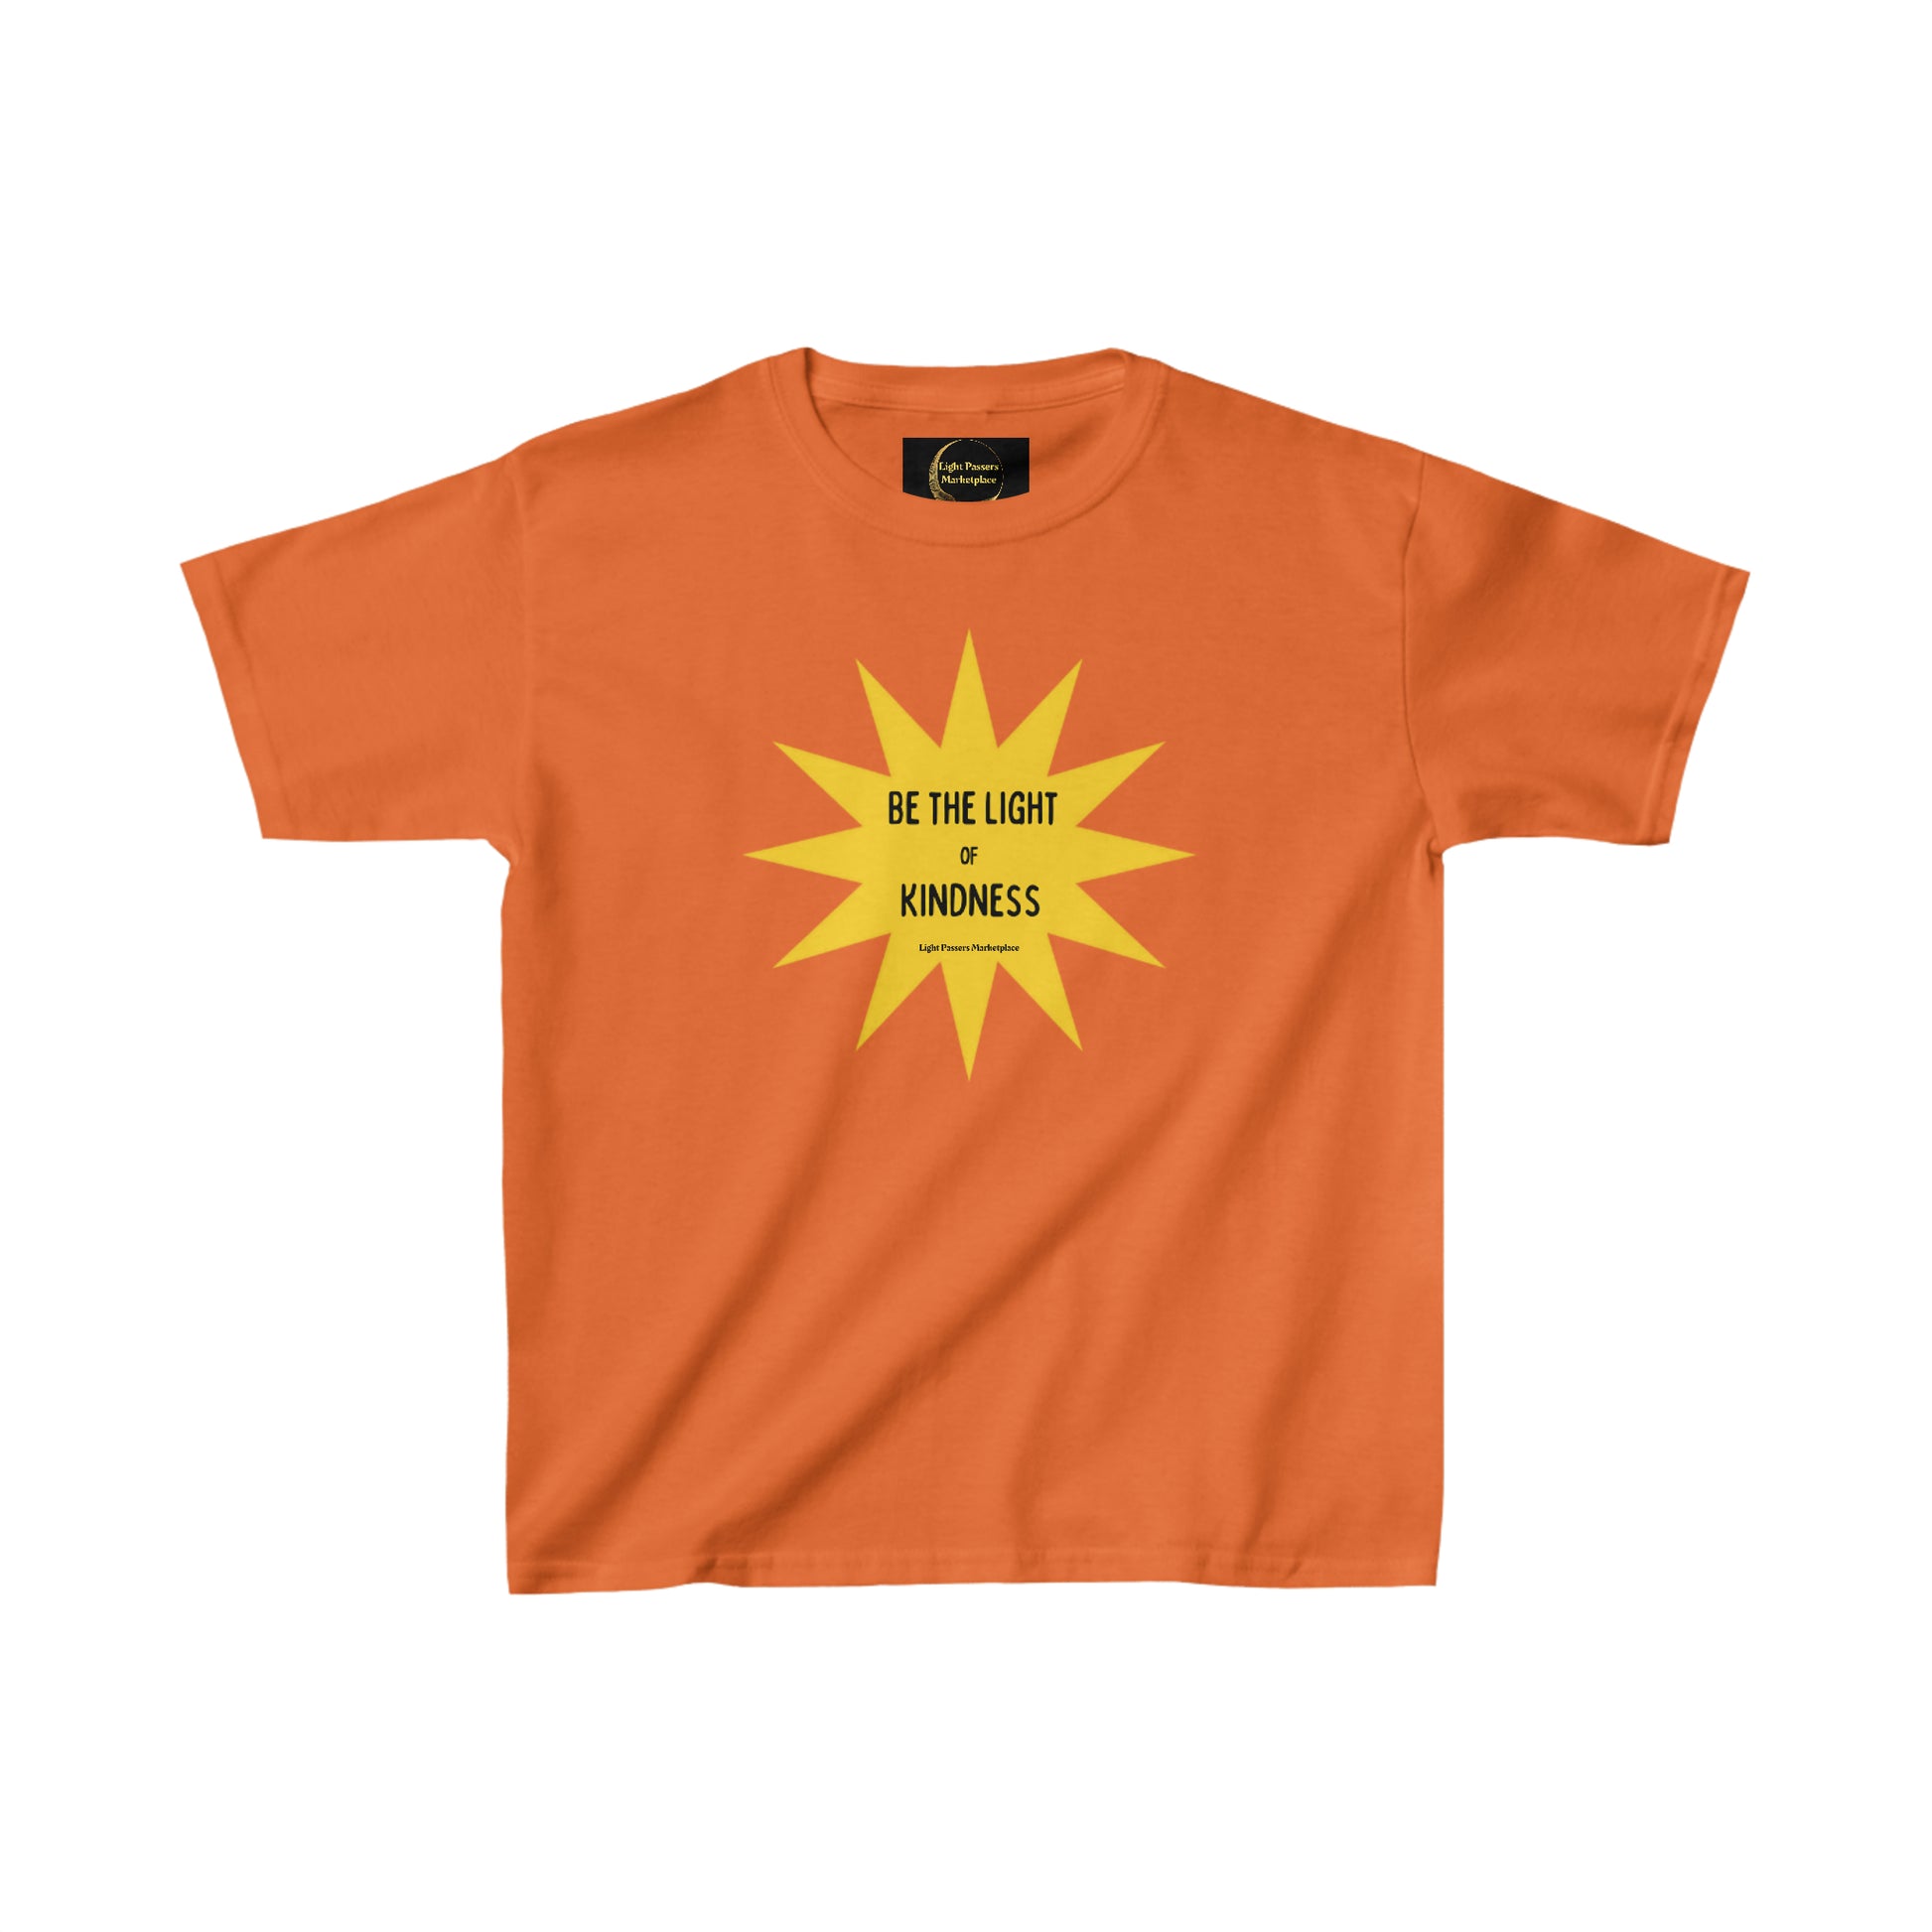 Youth cotton t-shirt featuring a yellow star design. Made of 100% cotton for solid colors, with twill tape shoulders for durability and ribbed collar for curl resistance. Classic fit, tear-away label.